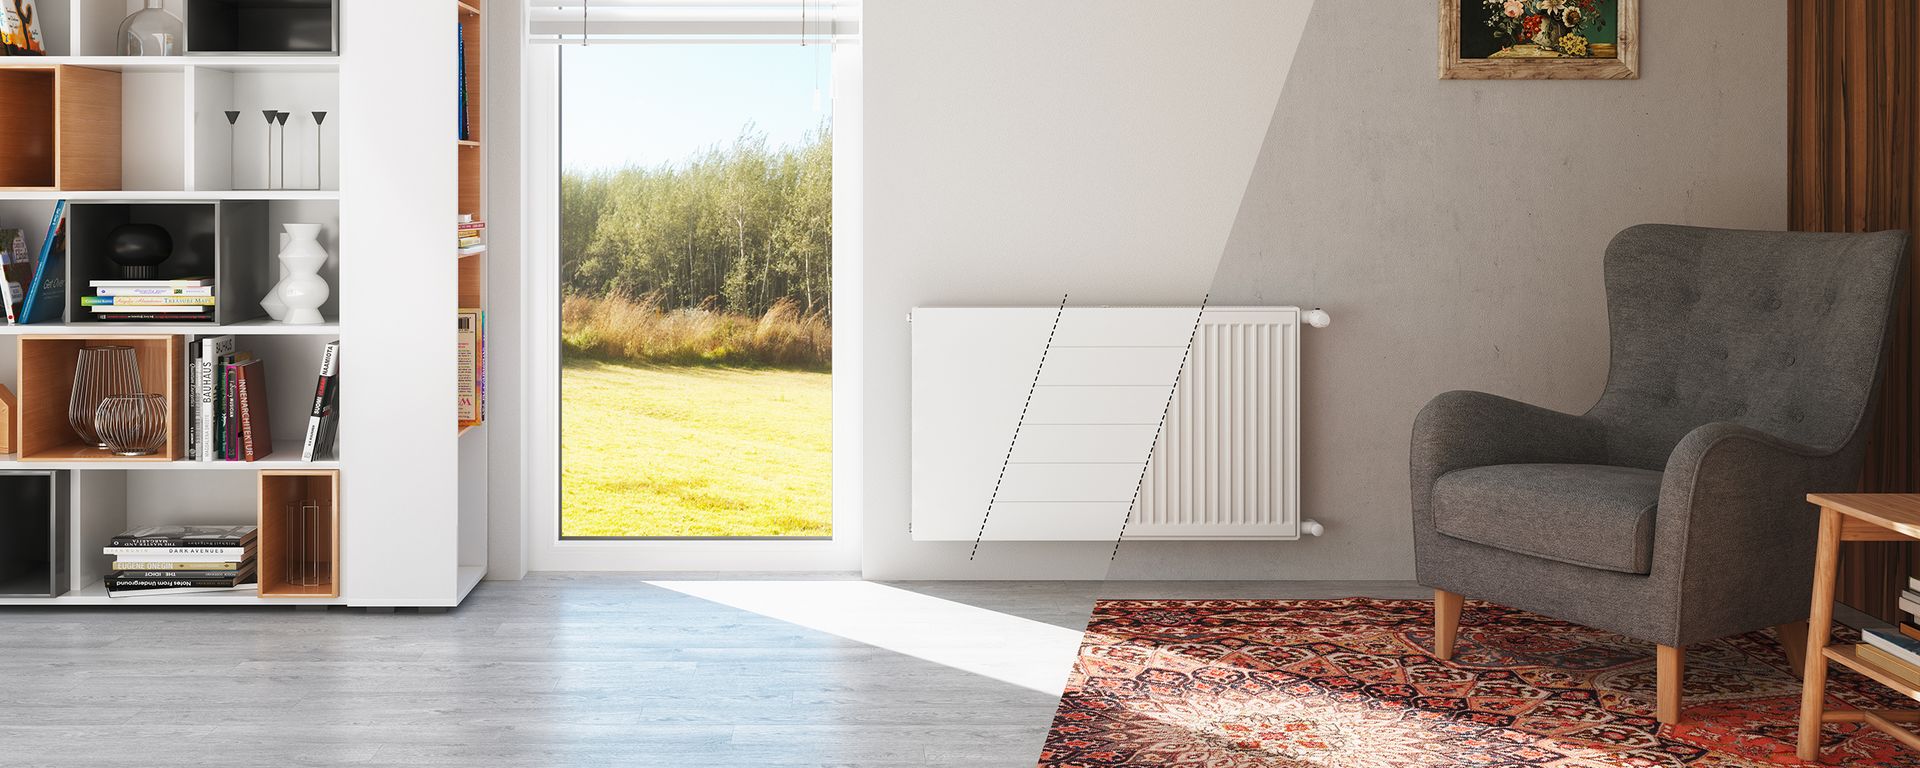 A new look for your radiator